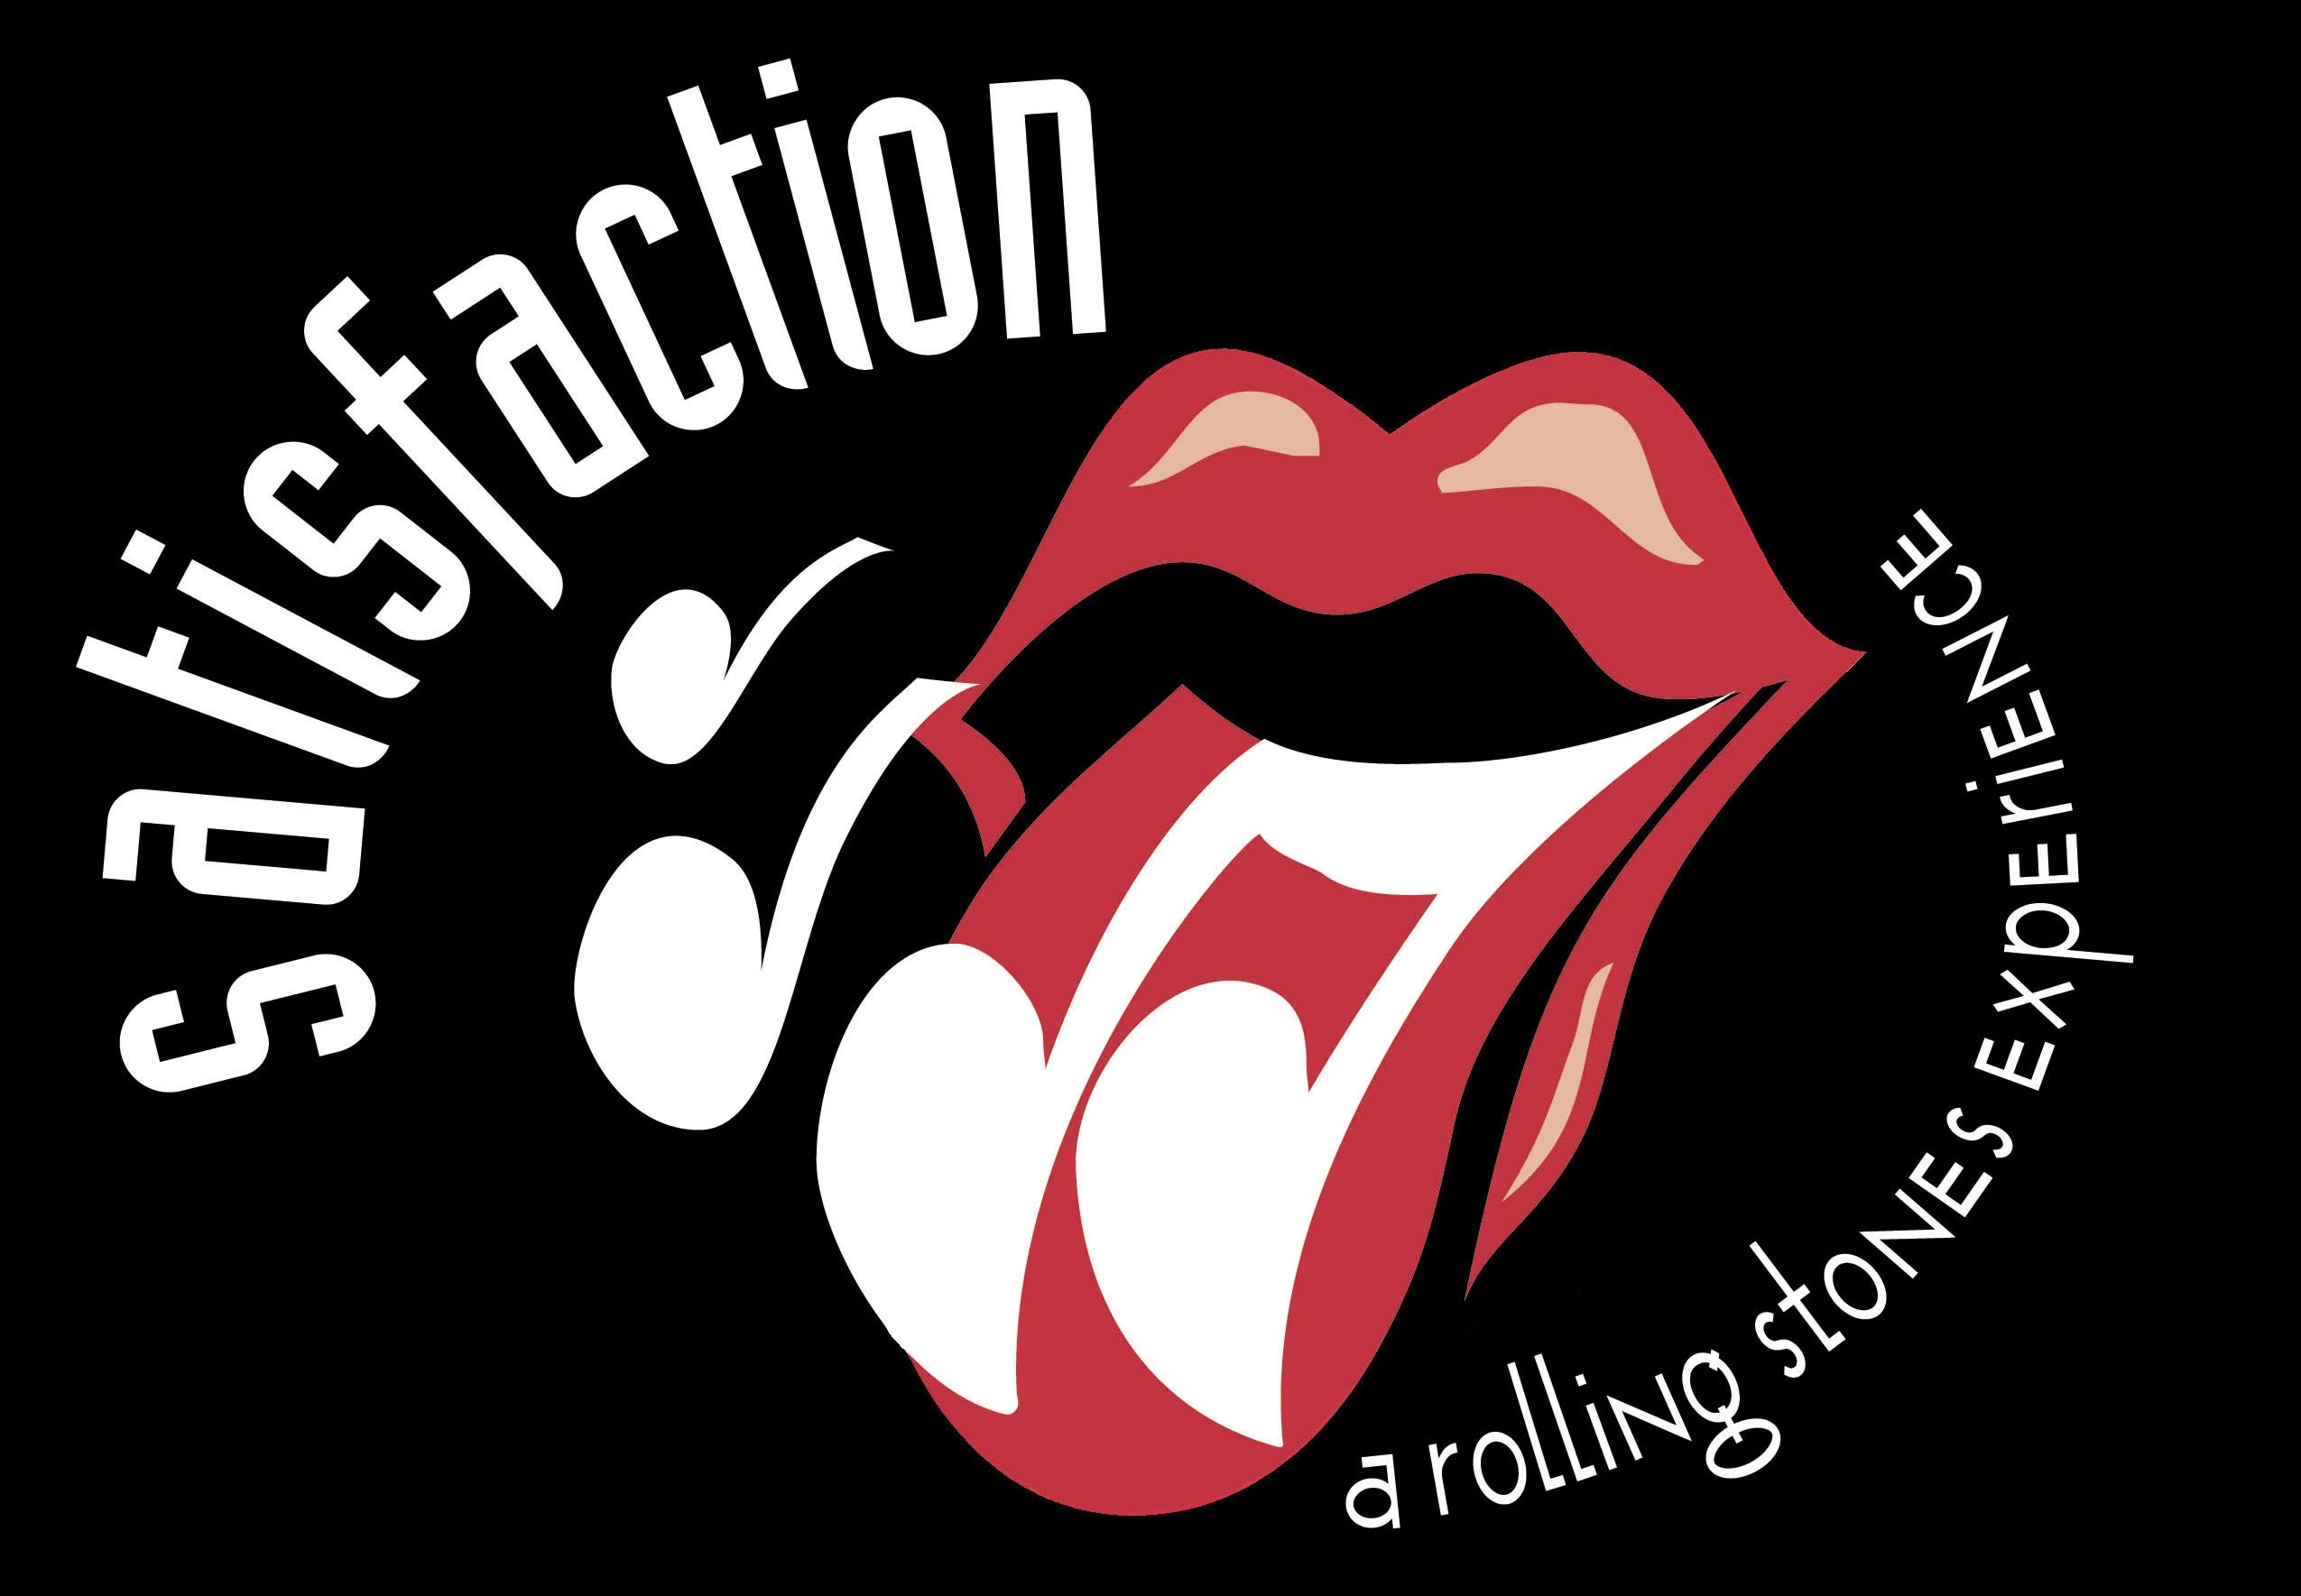 Energetic Rolling Stones, Electrifying stage presence, Rolling Stones live, Rock and roll legends, 2550x1770 HD Desktop